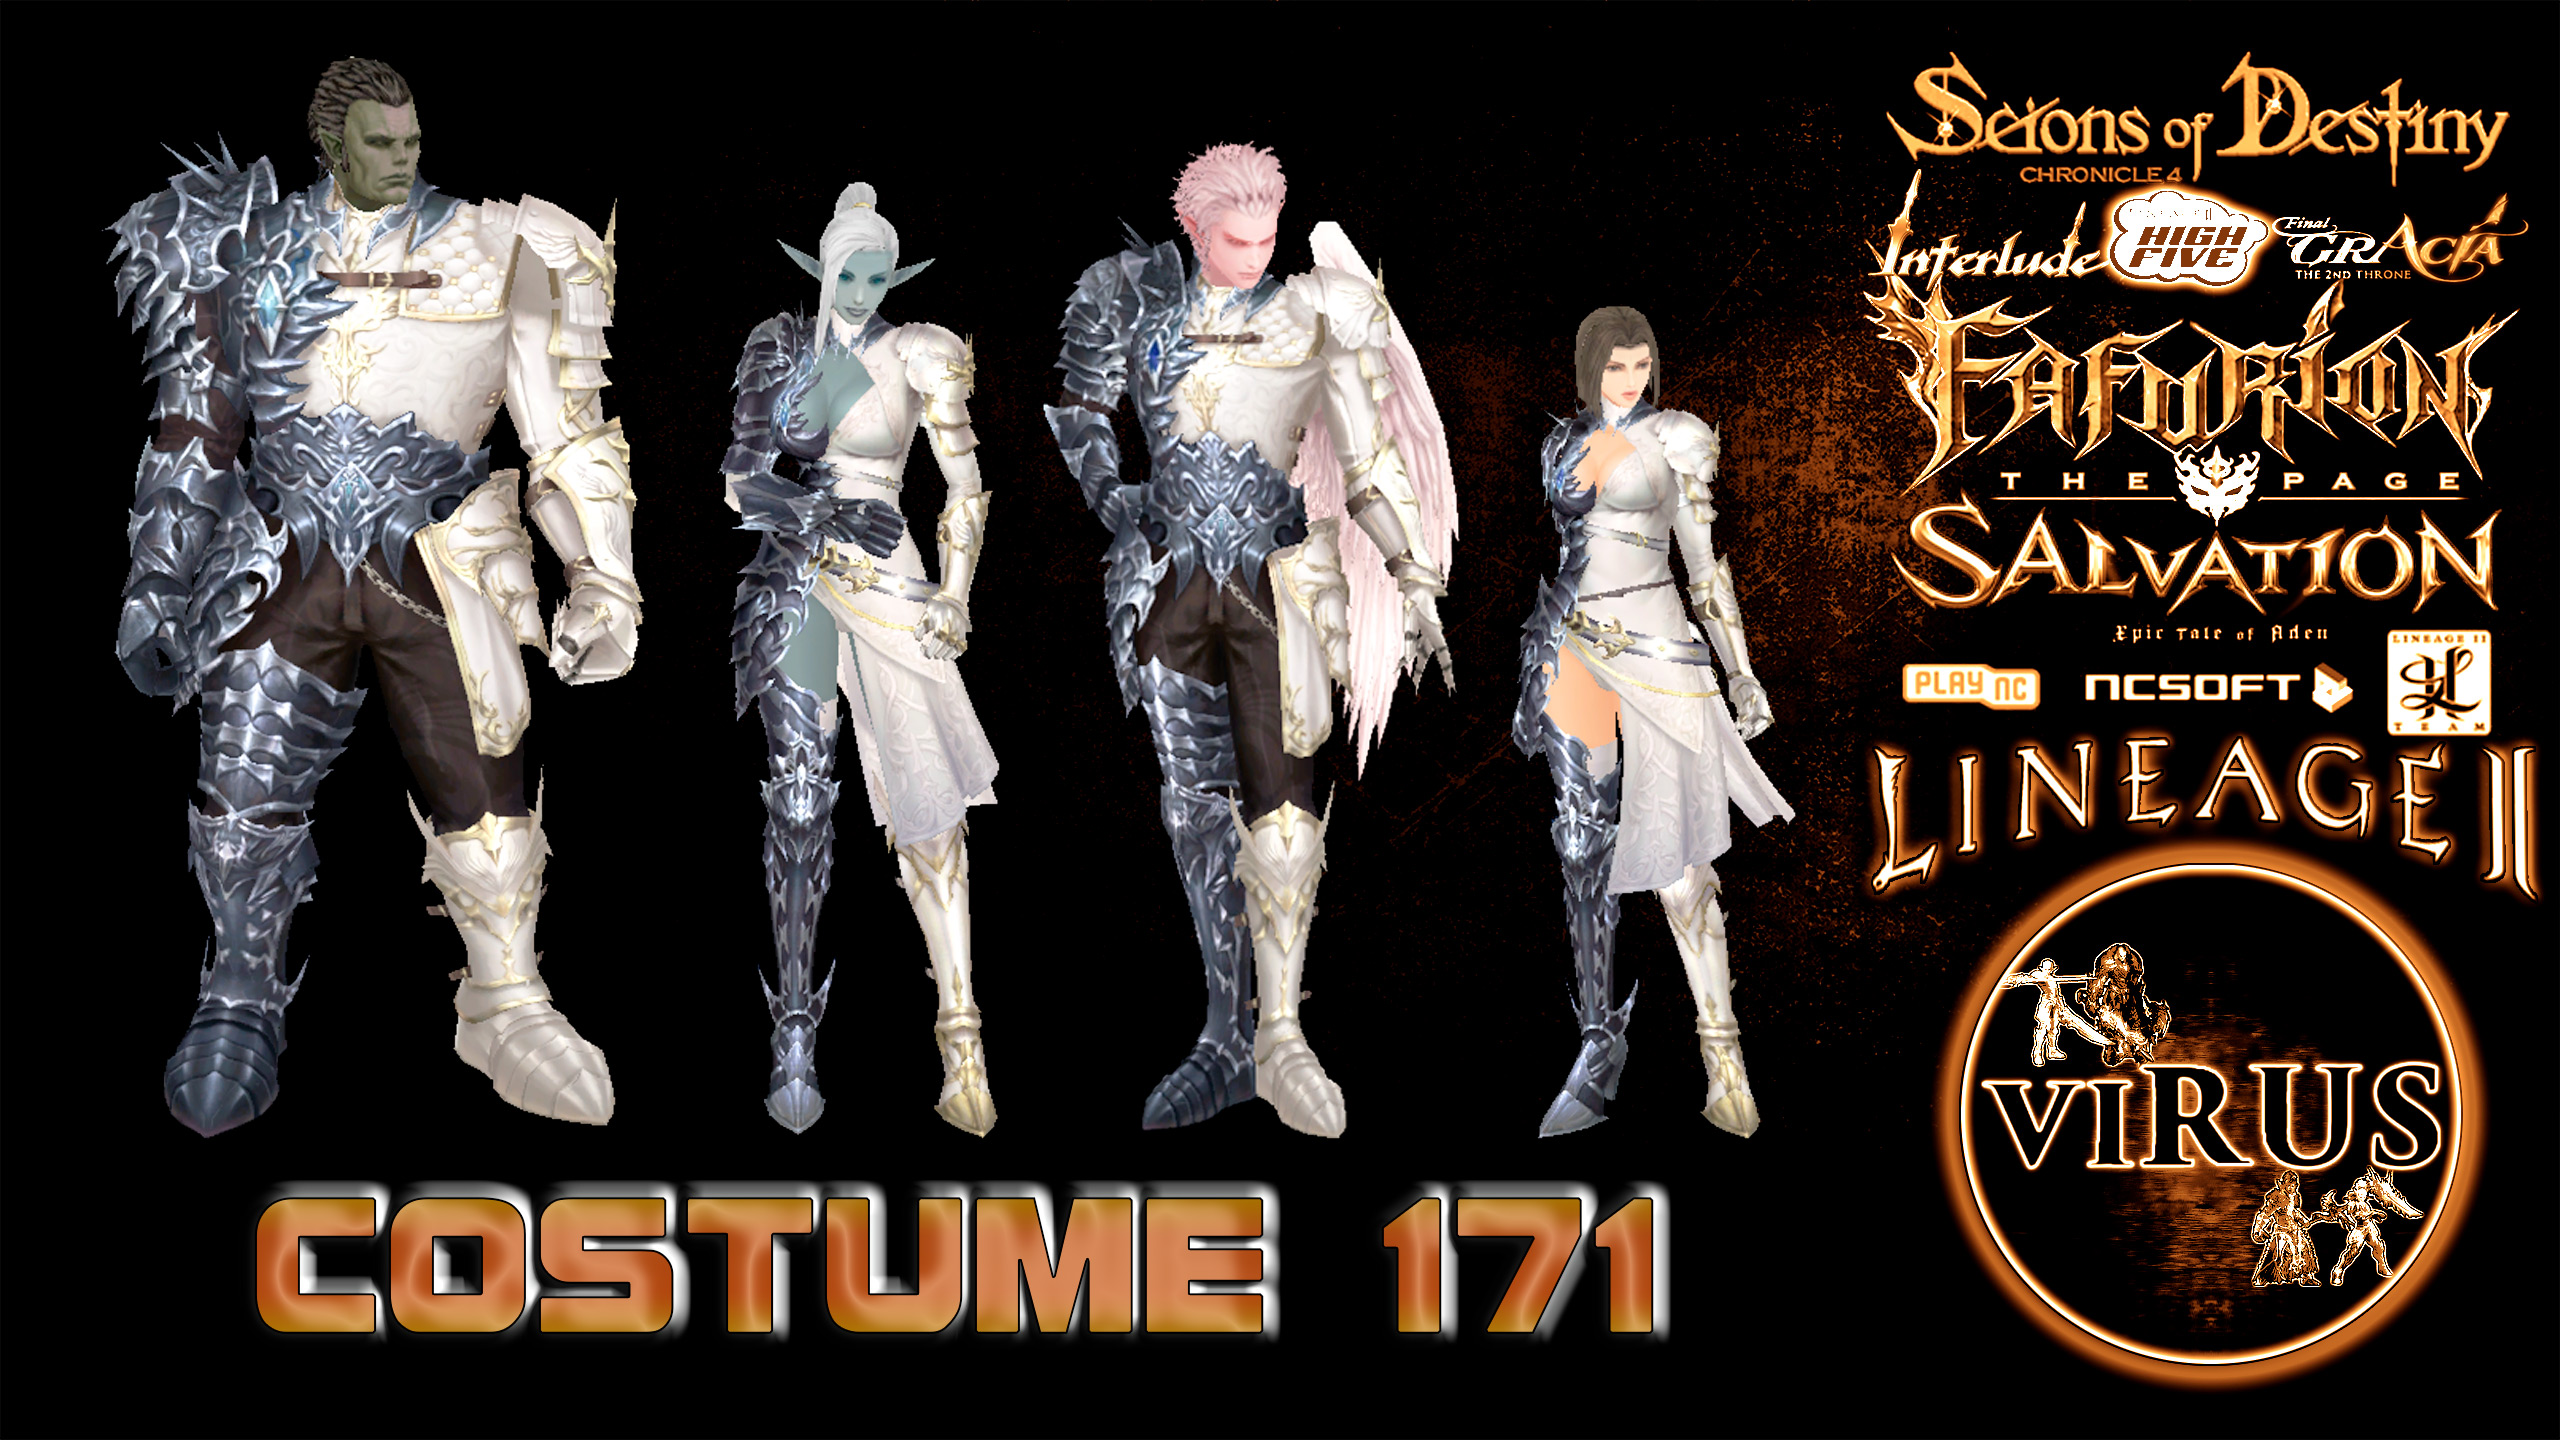 New Costumes. 171. LINEAGE II. Any Chronicles ◄√i®uS►